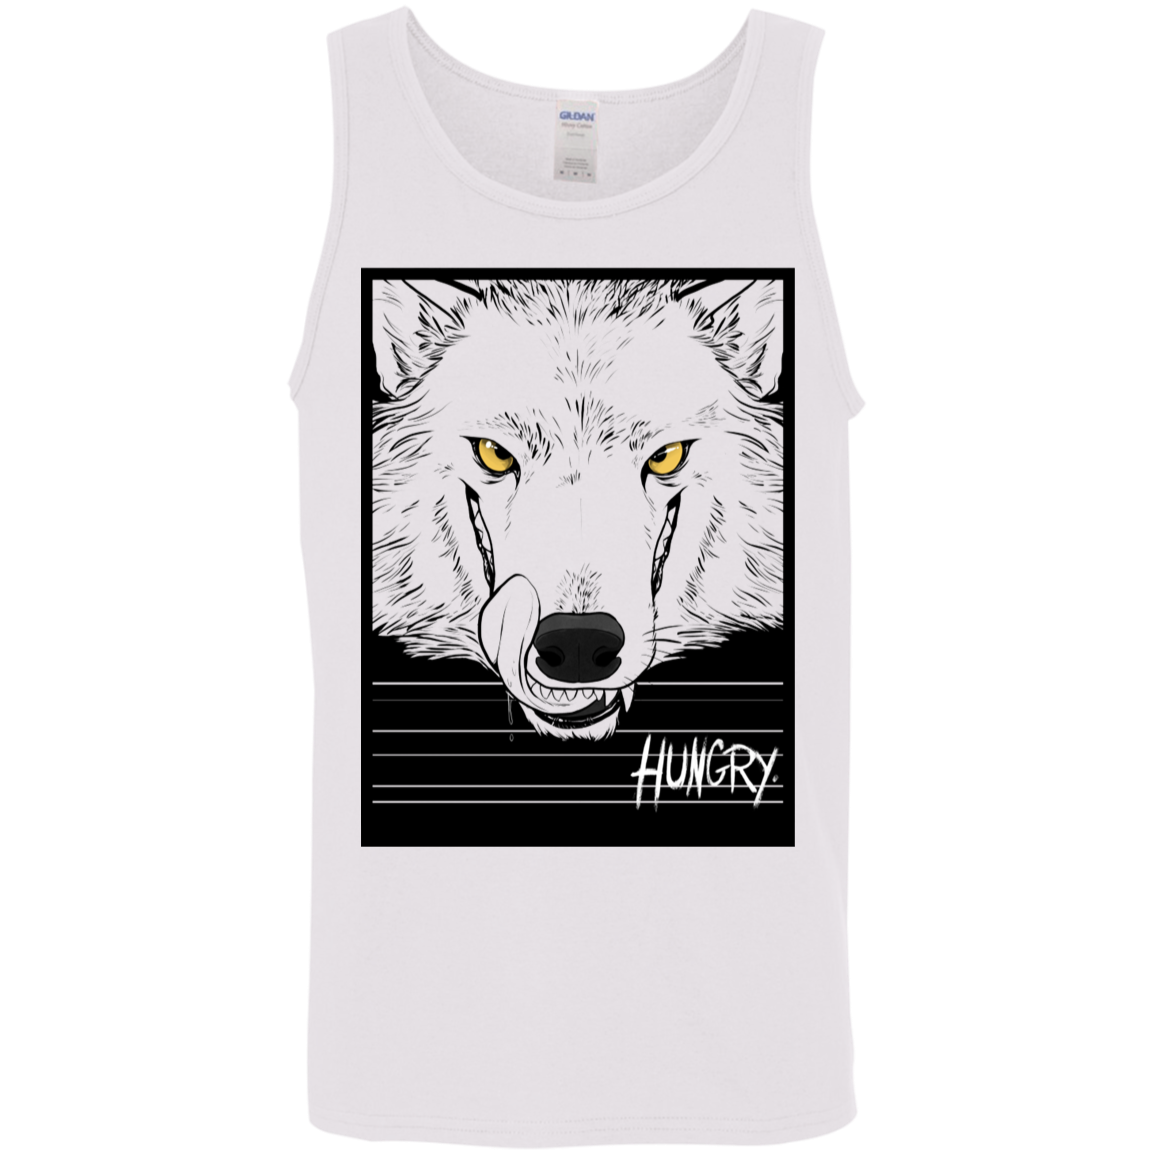 Hungry - Tank Top